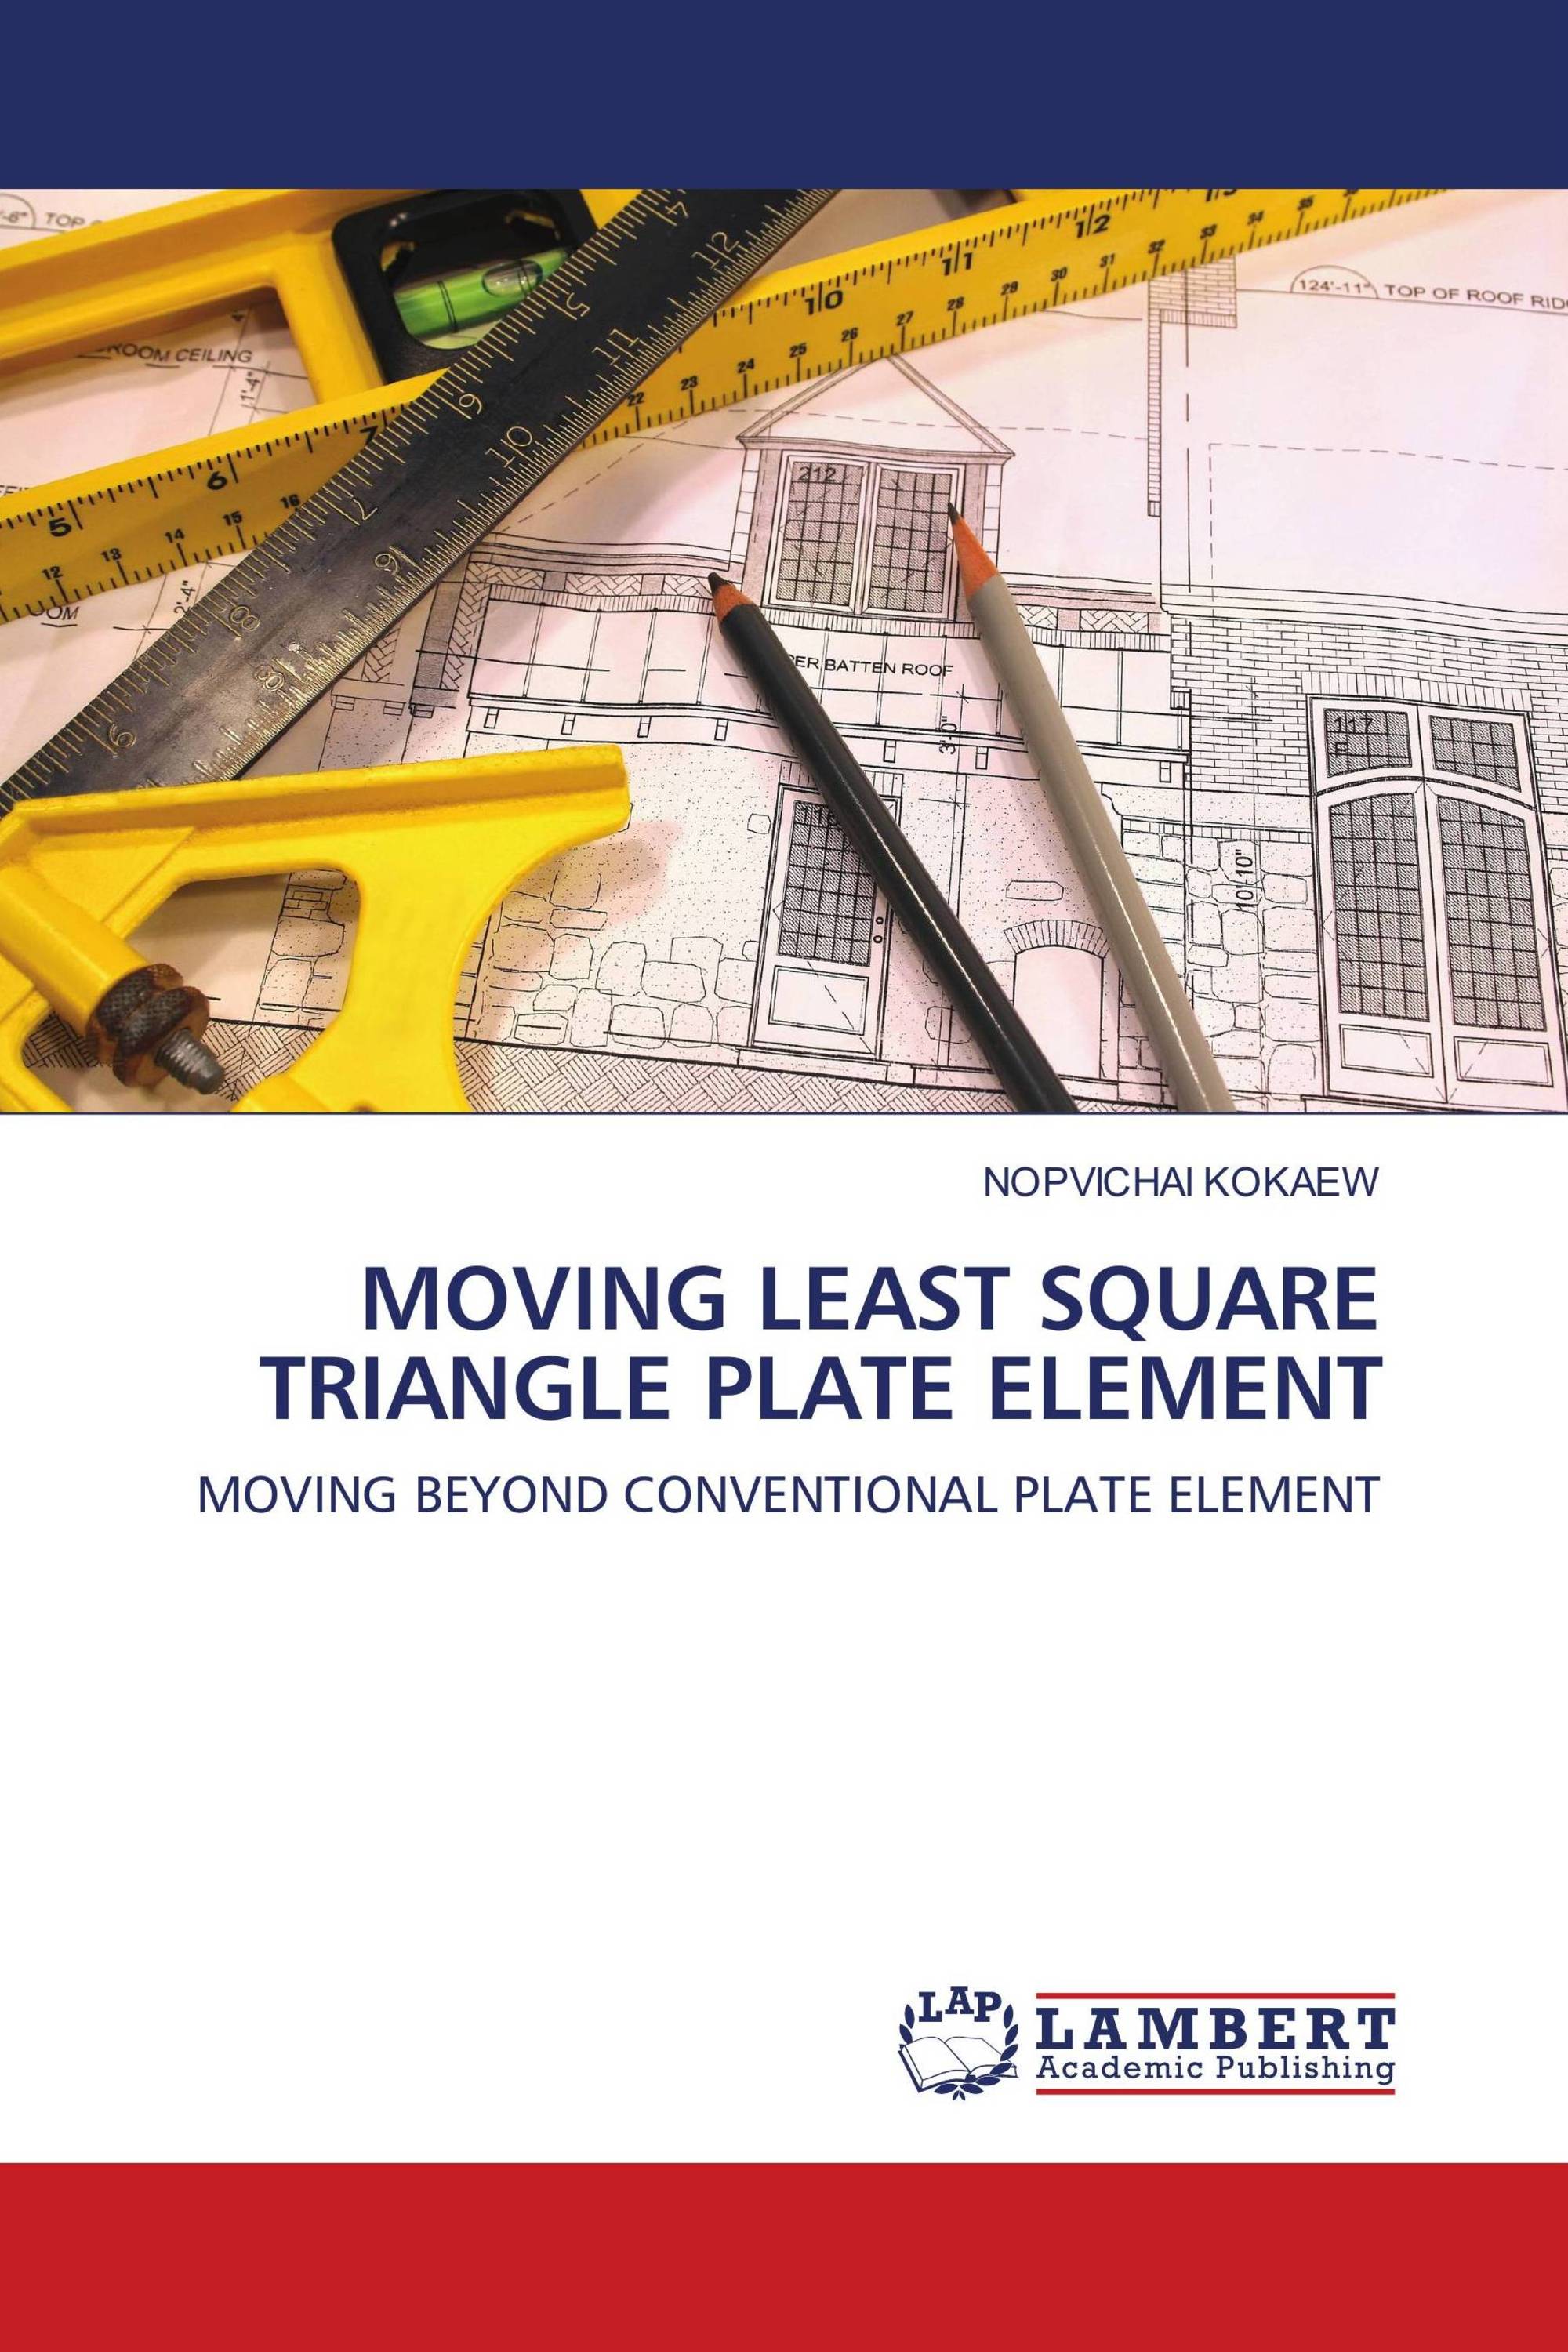 MOVING LEAST SQUARE TRIANGLE PLATE ELEMENT